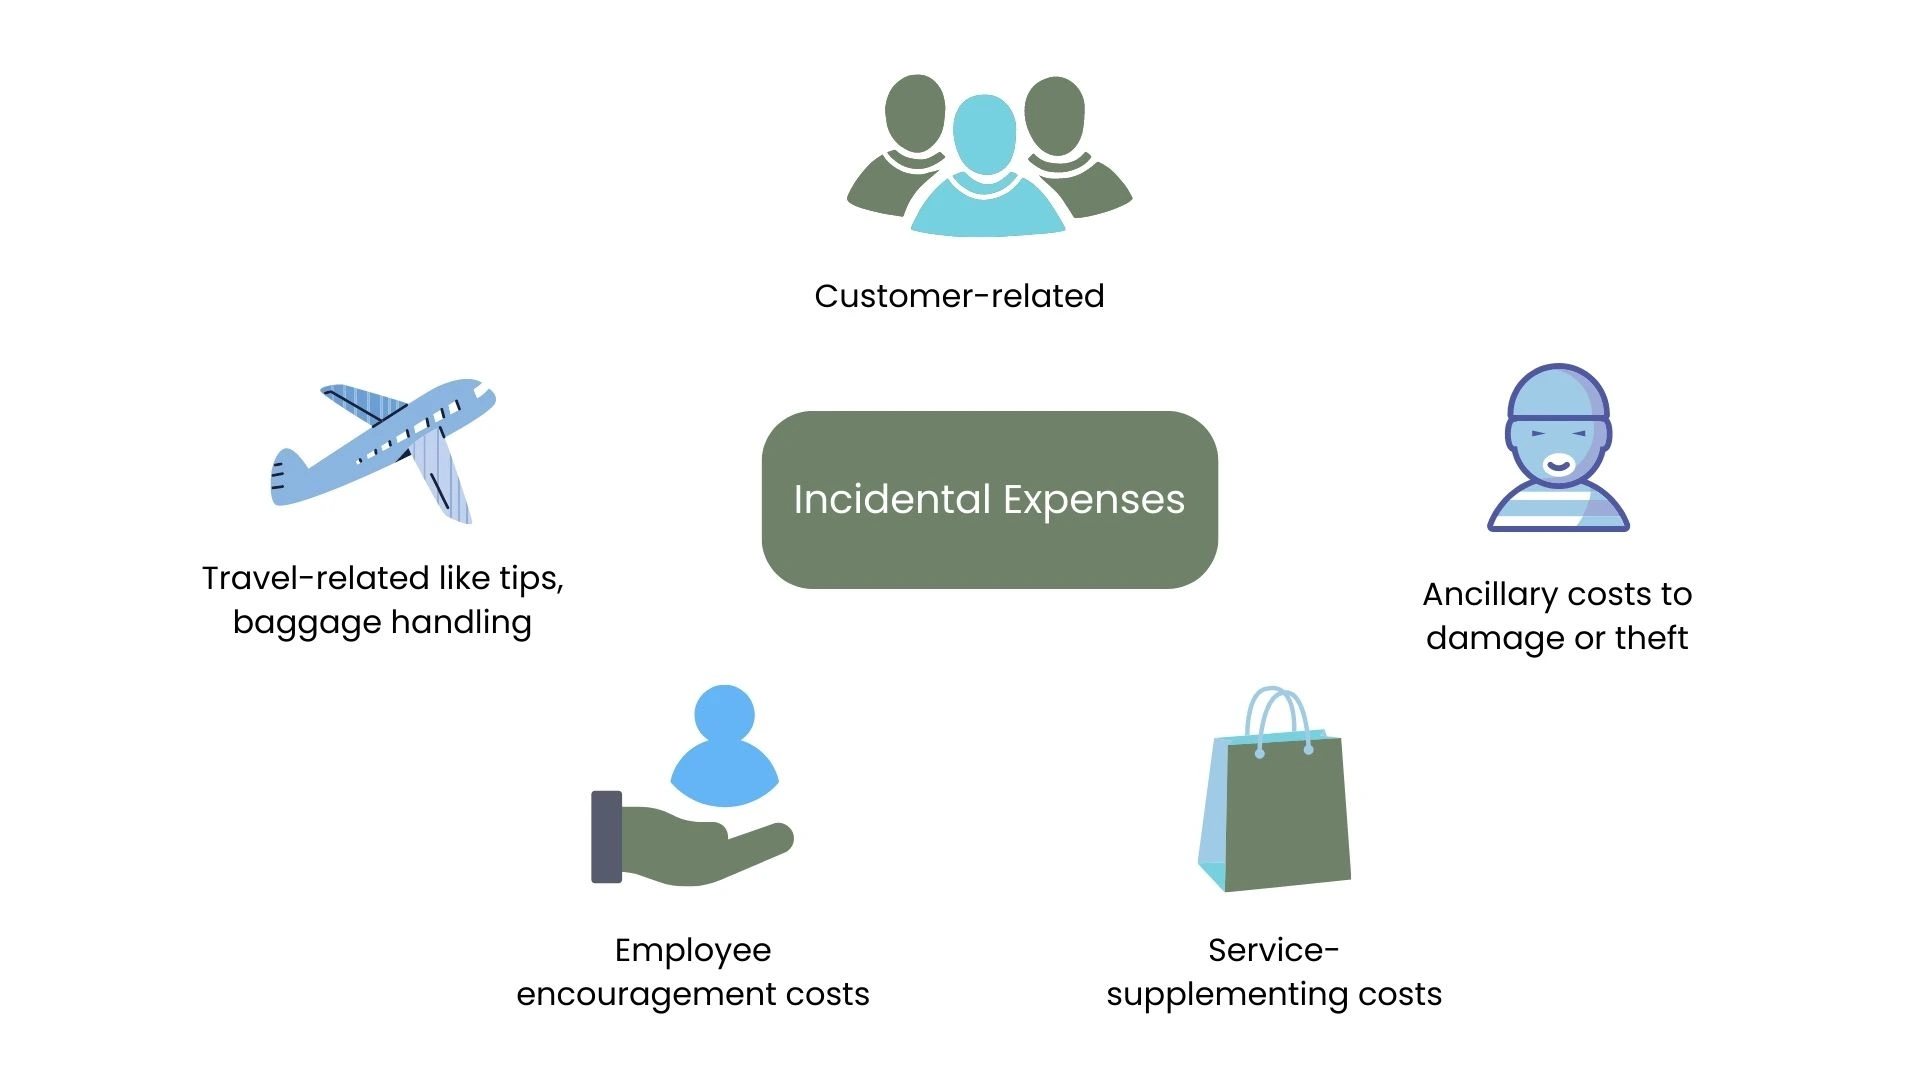 Incidental expenses- Happay